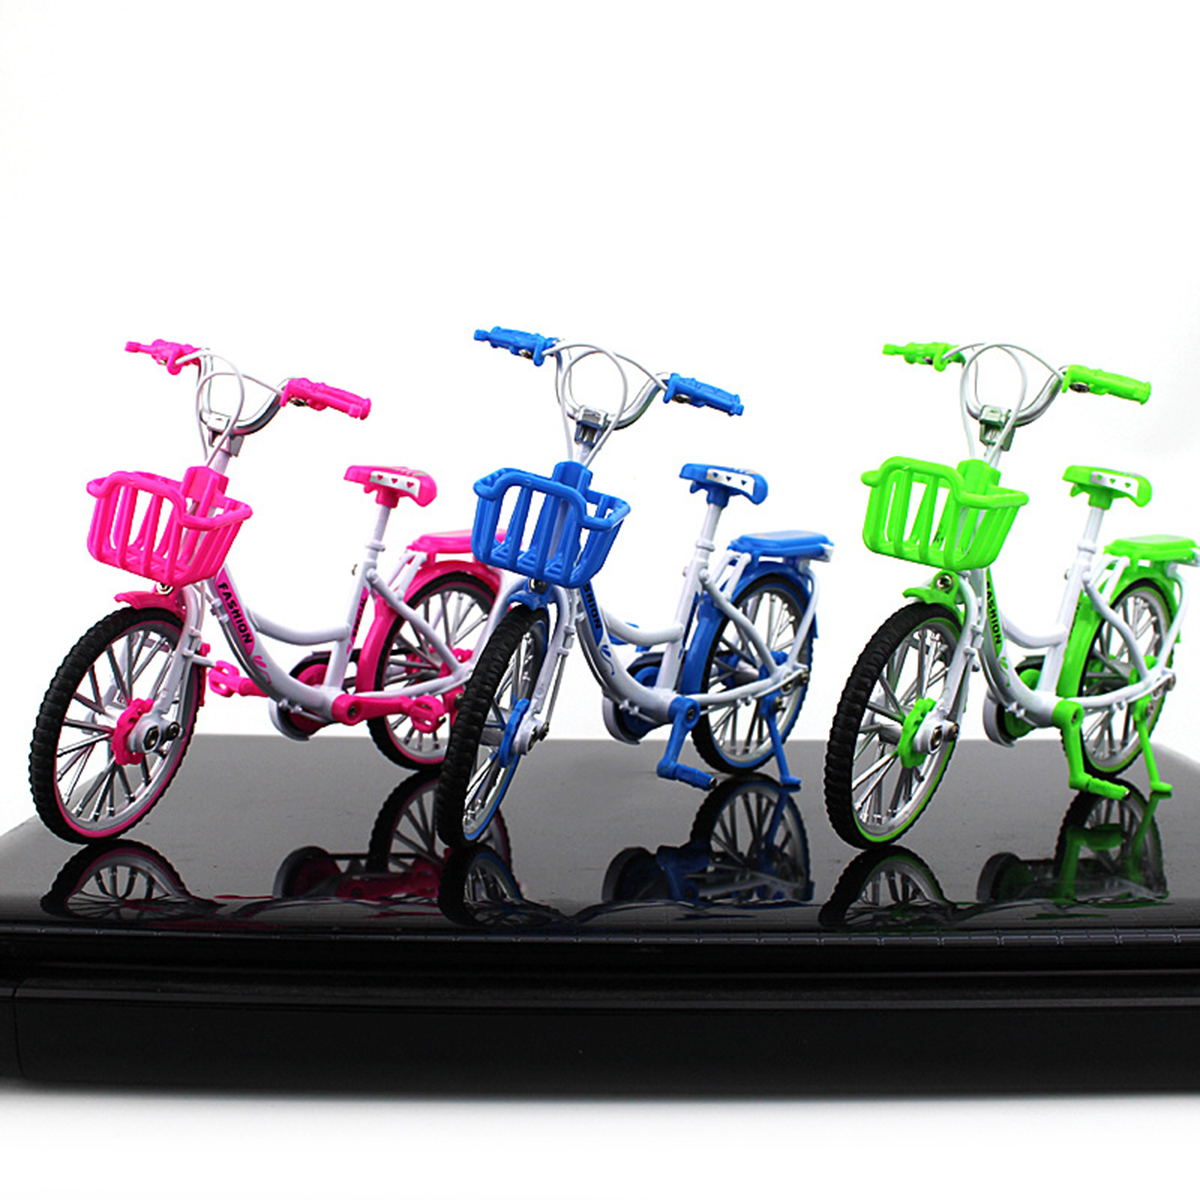 110-3D-Mini-Multi-color-Alloy-Mountain-Racing-Bicycle-Rotatable-Wheel-Diecast-Model-Toy-for-Decorati-1704789-5